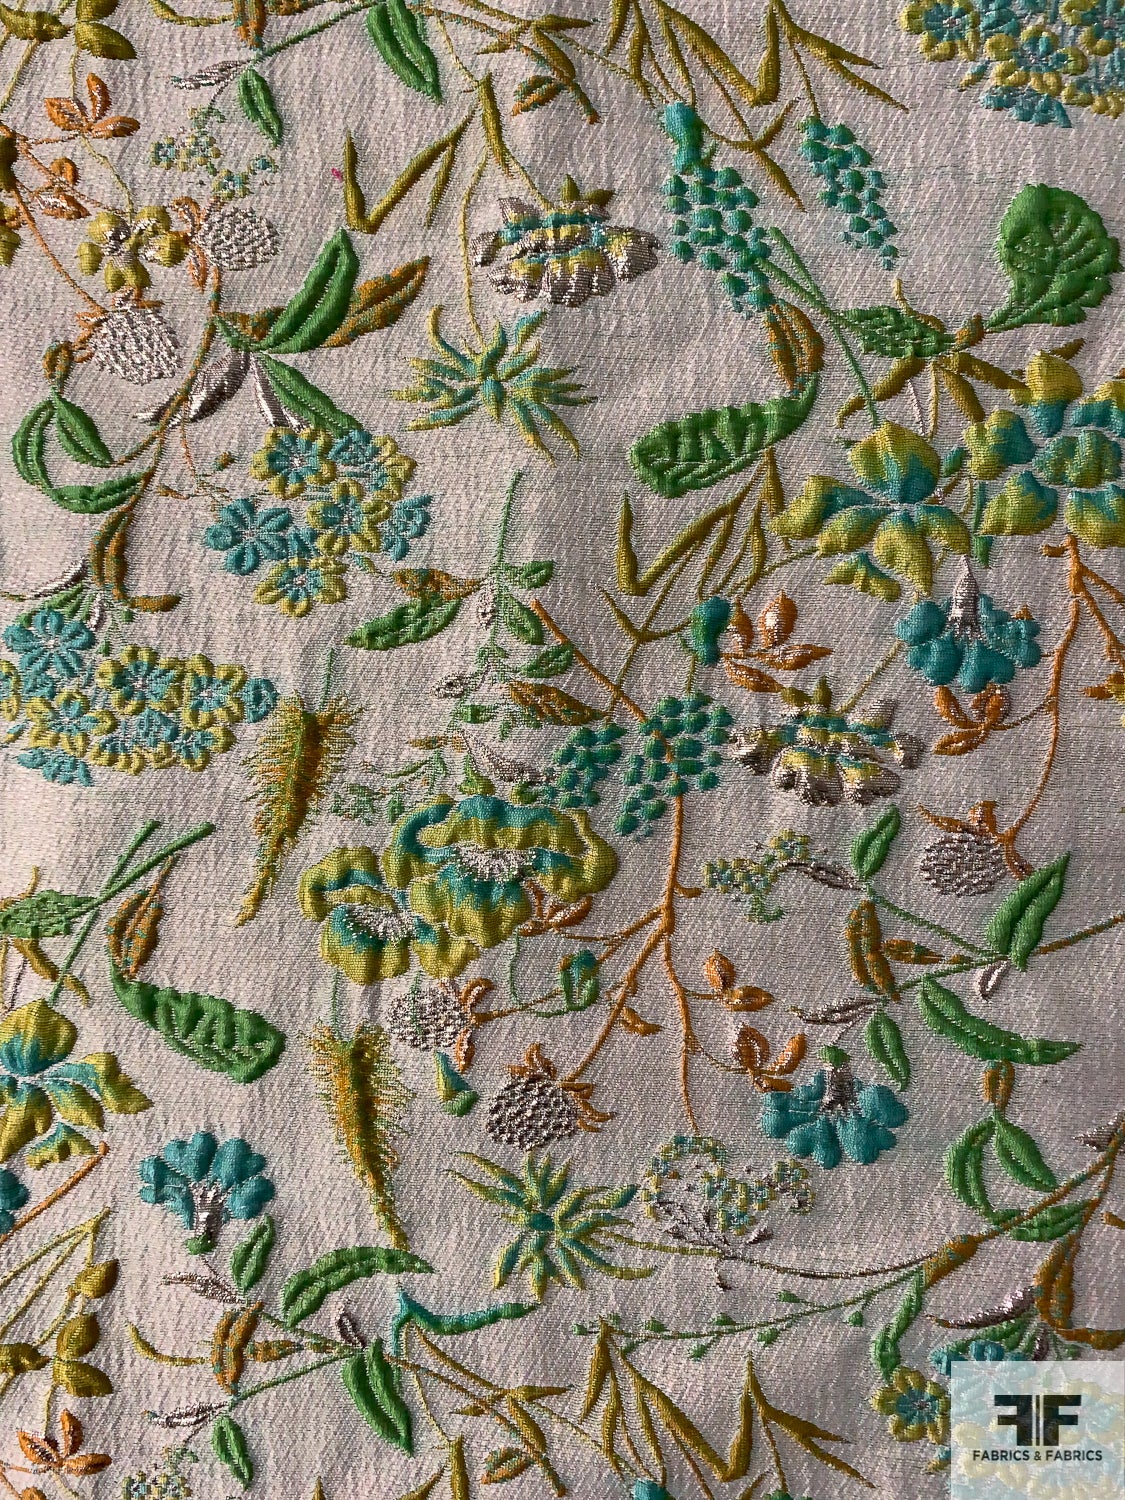 Exquisite Floral Textured Brocade with Metallic Accents - Shades of Greens / Turmeric / Grey